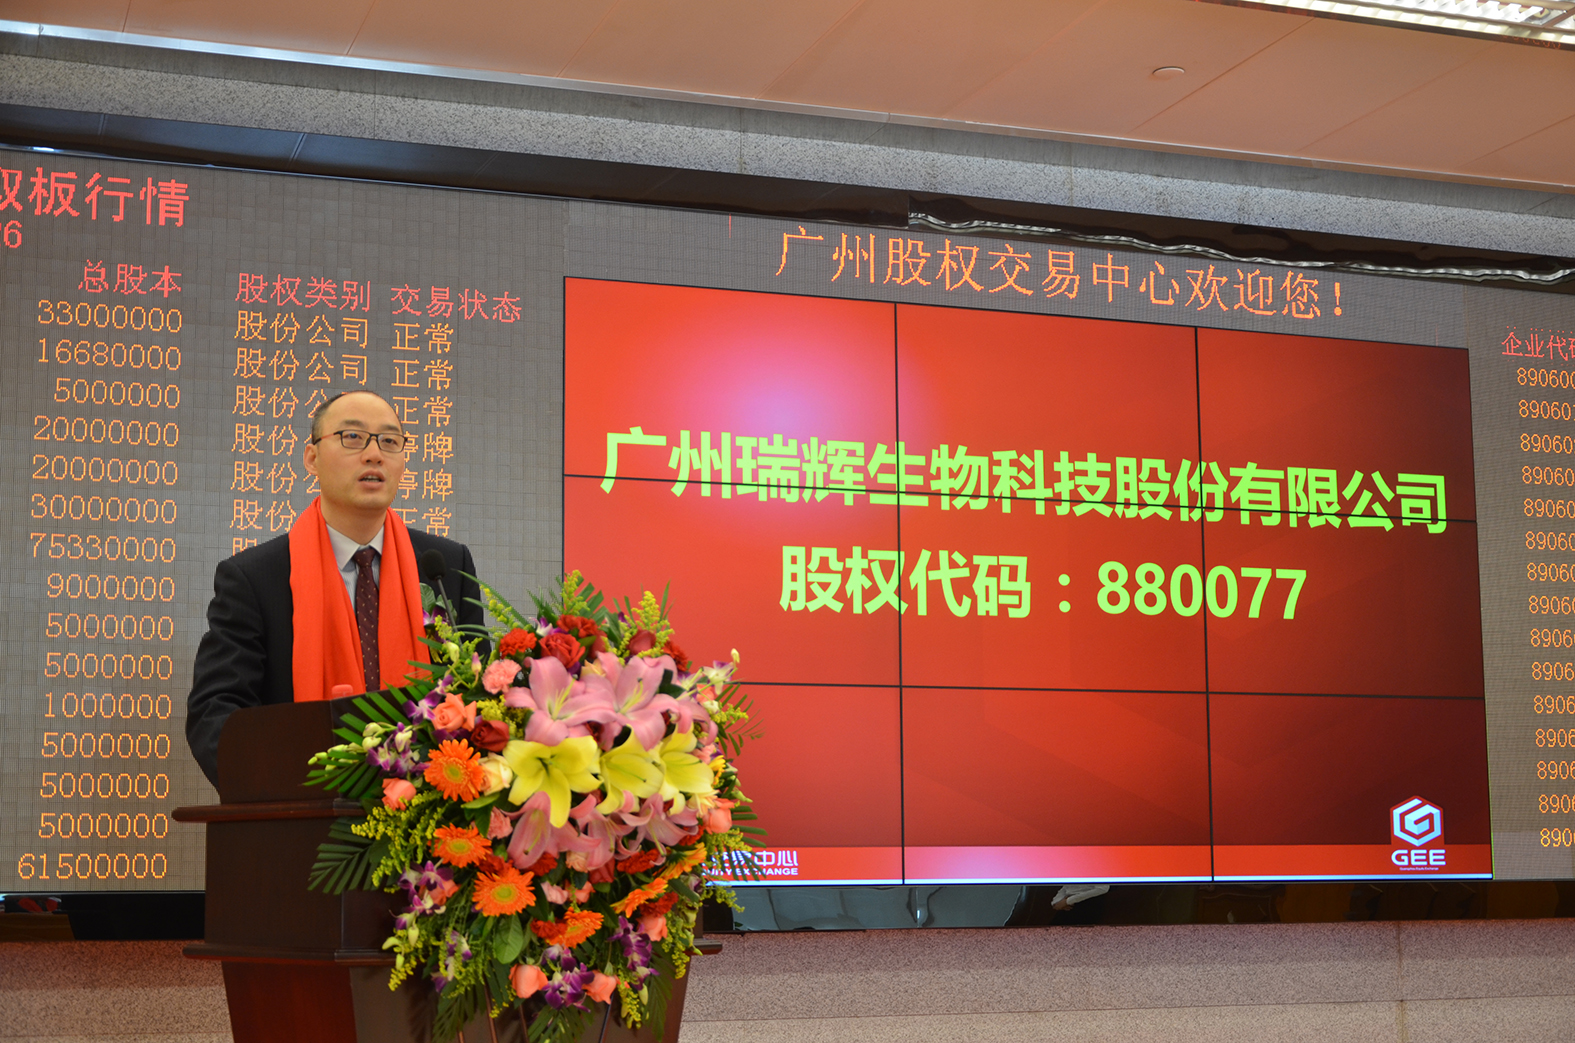 Warm congratulations to Rhfay biology on its successful listing in Guangzhou equity trading center